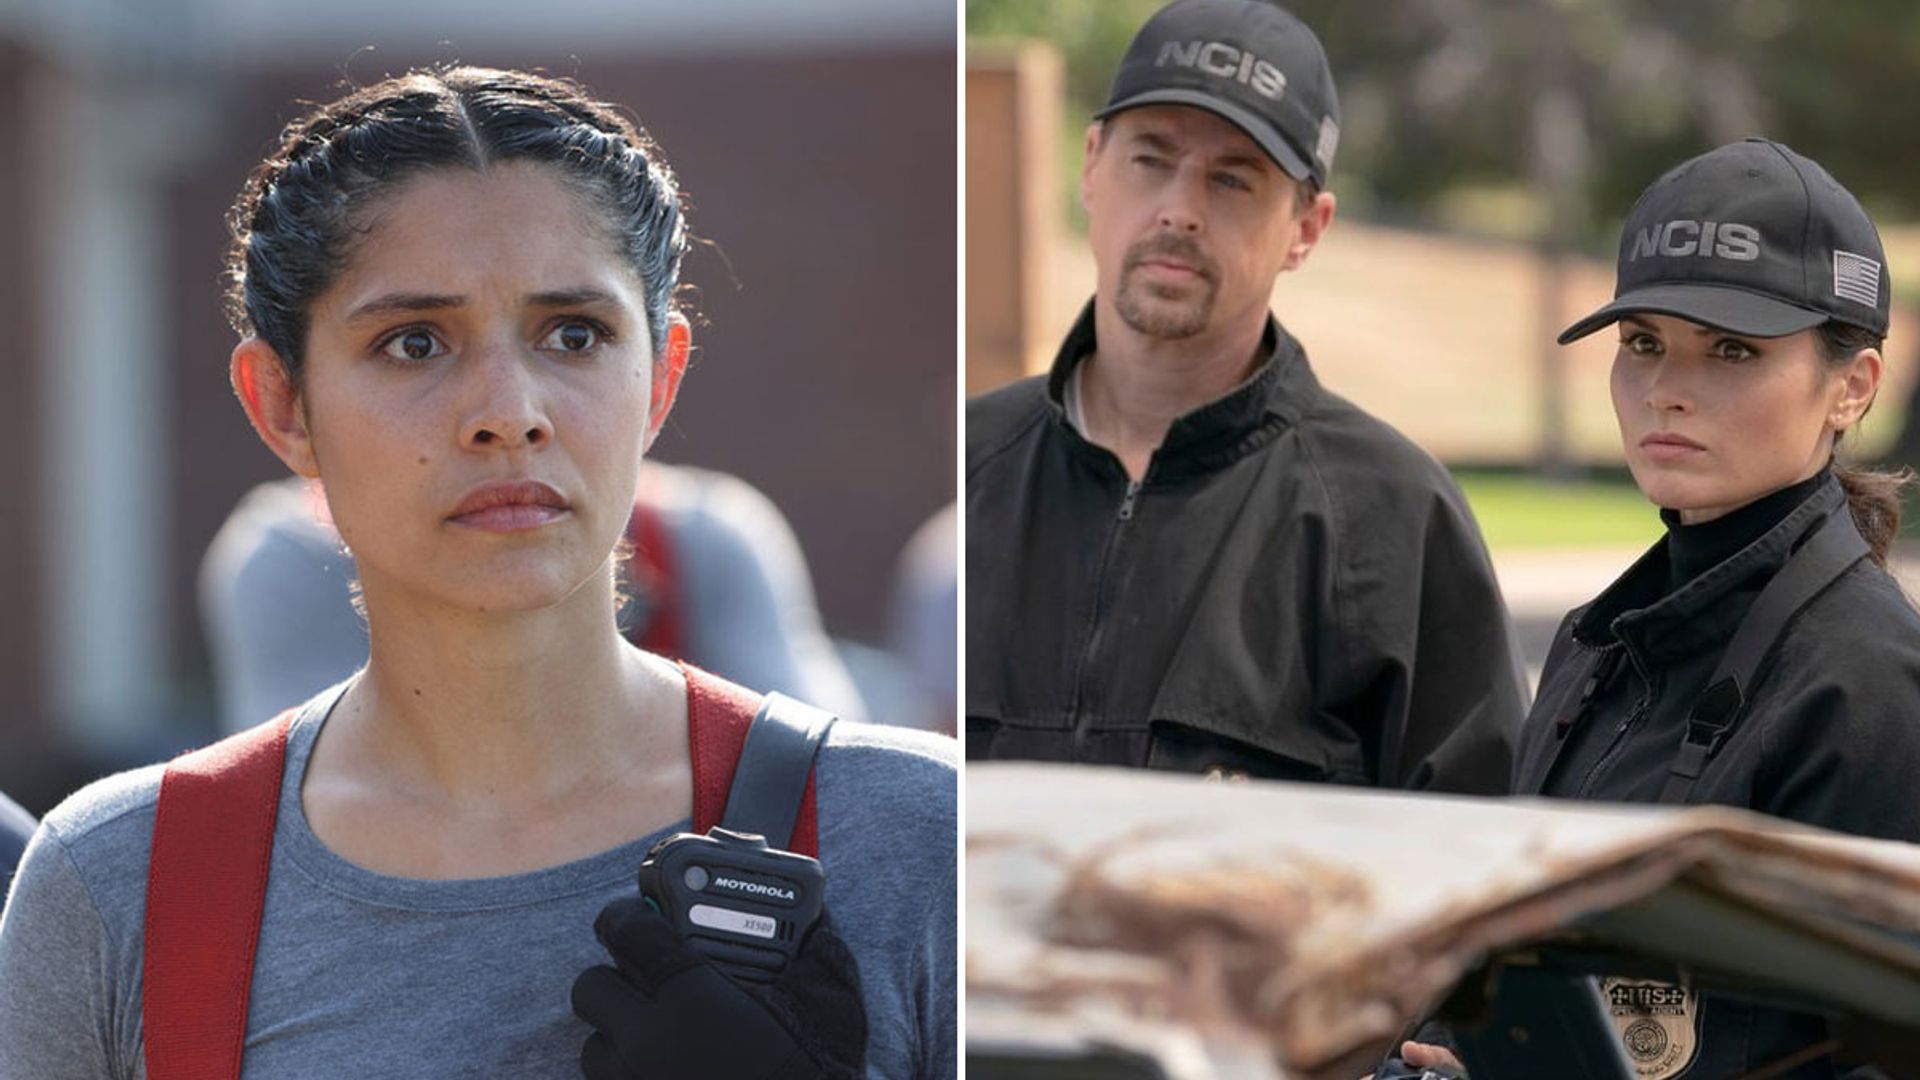 NCIS, Chicago Fire and more suffer major setback - get the details